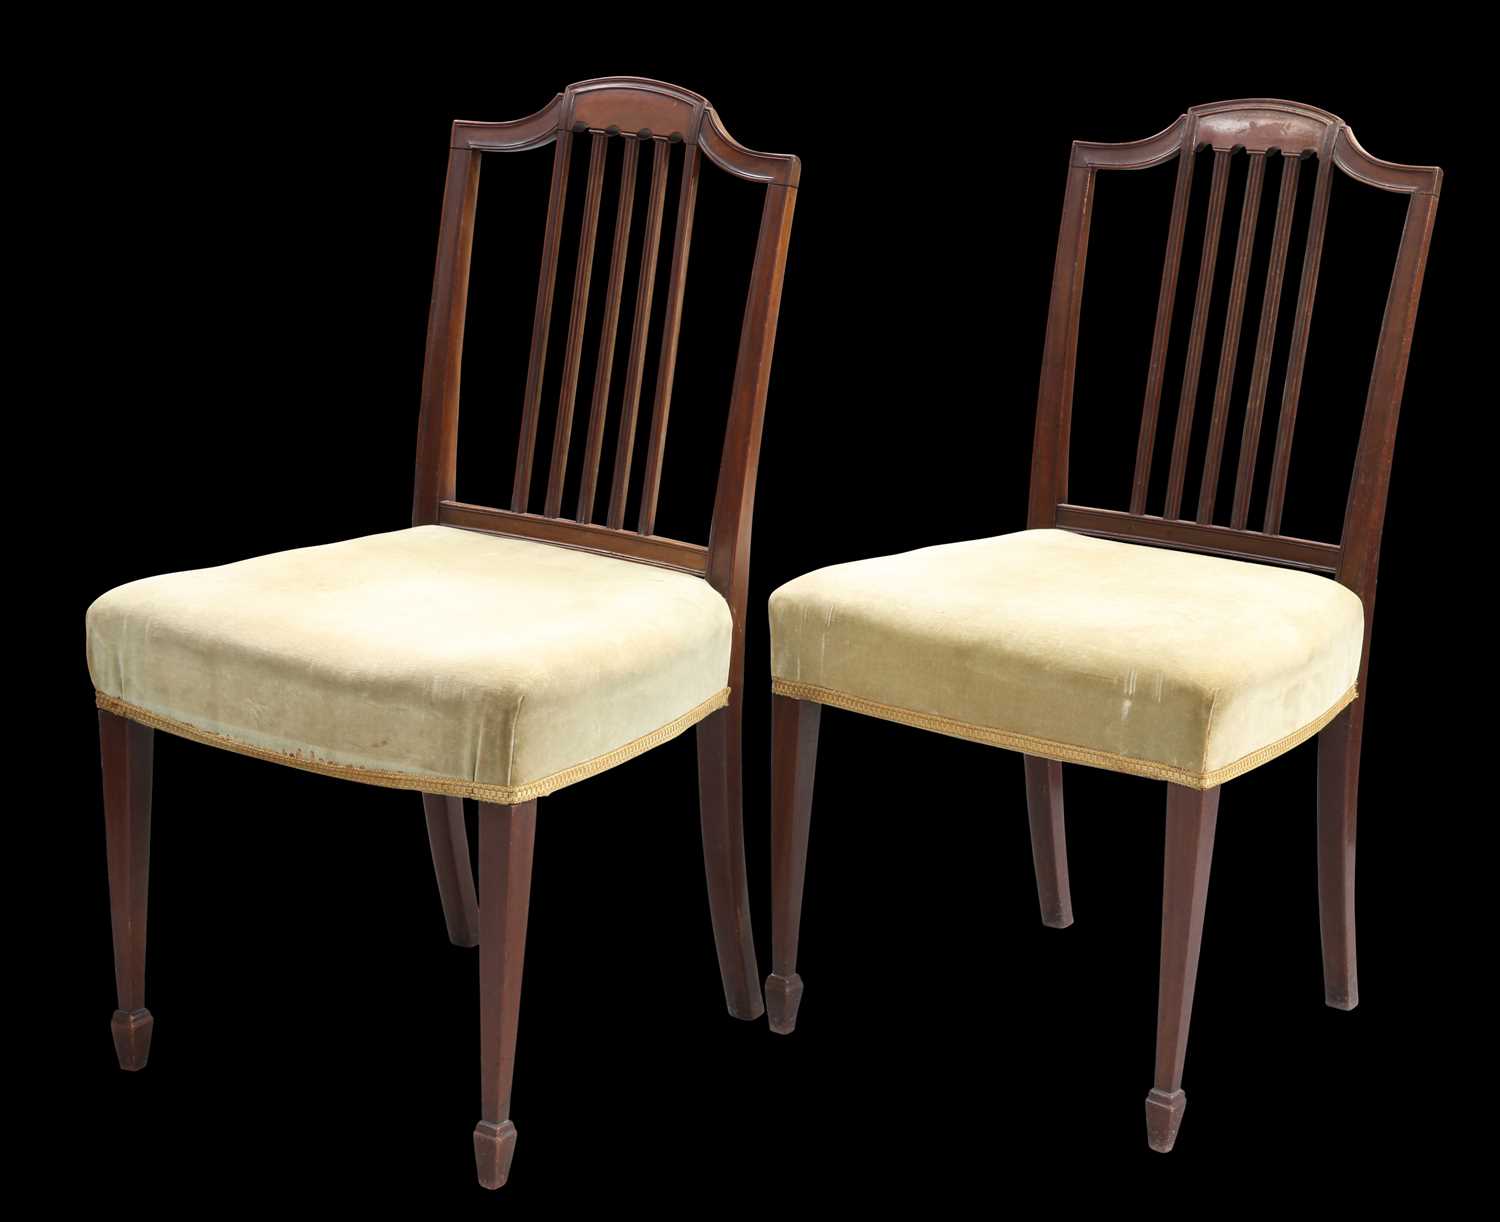 A PAIR OF GEORGE III STYLE MAHOGANY SIDE CHAIRS